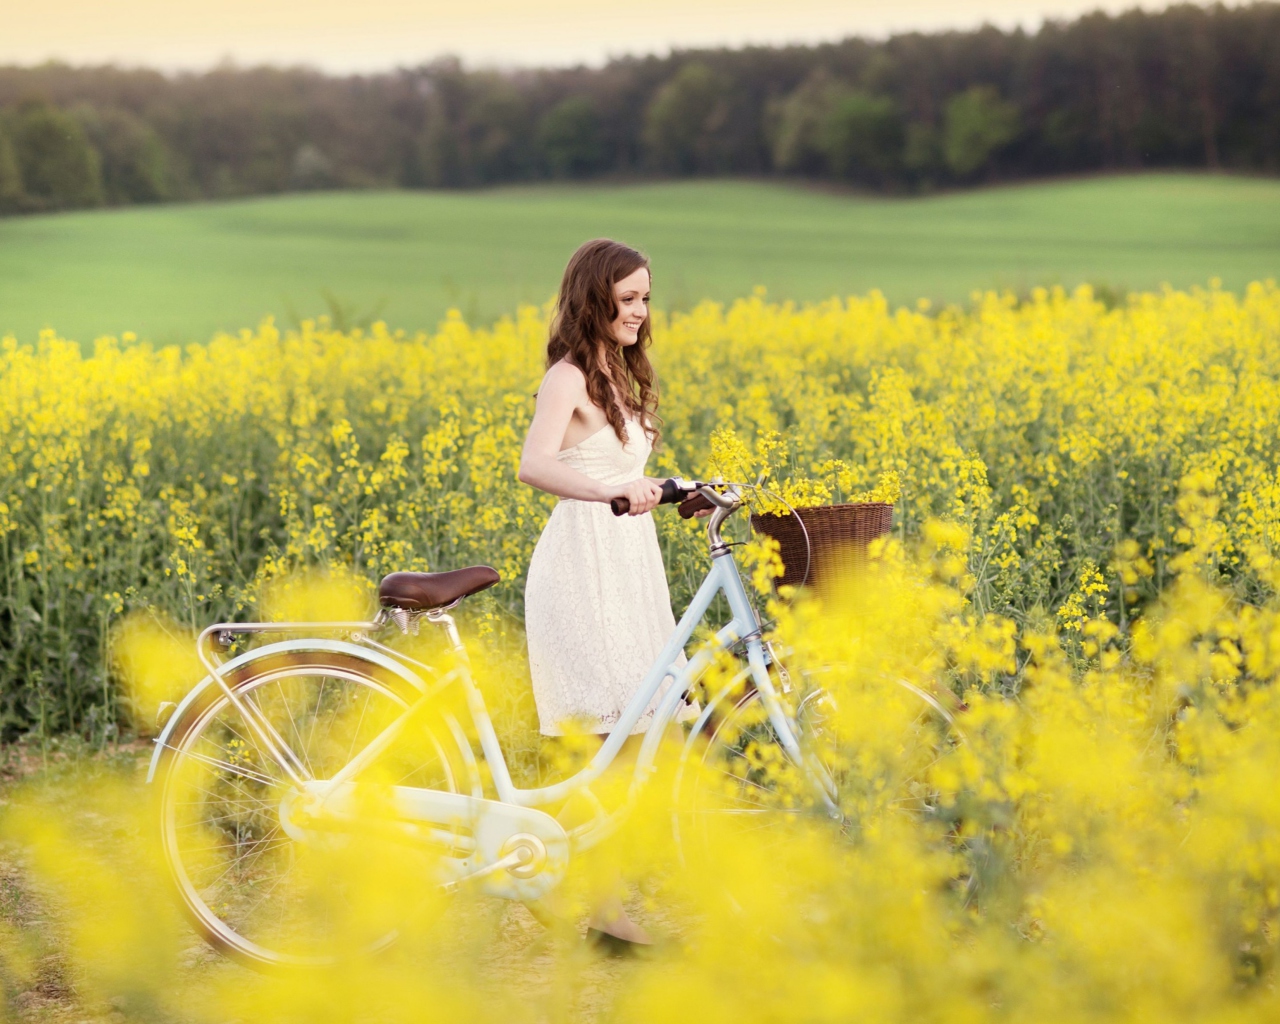 Girl With Bicycle In Yellow Field wallpaper 1280x1024